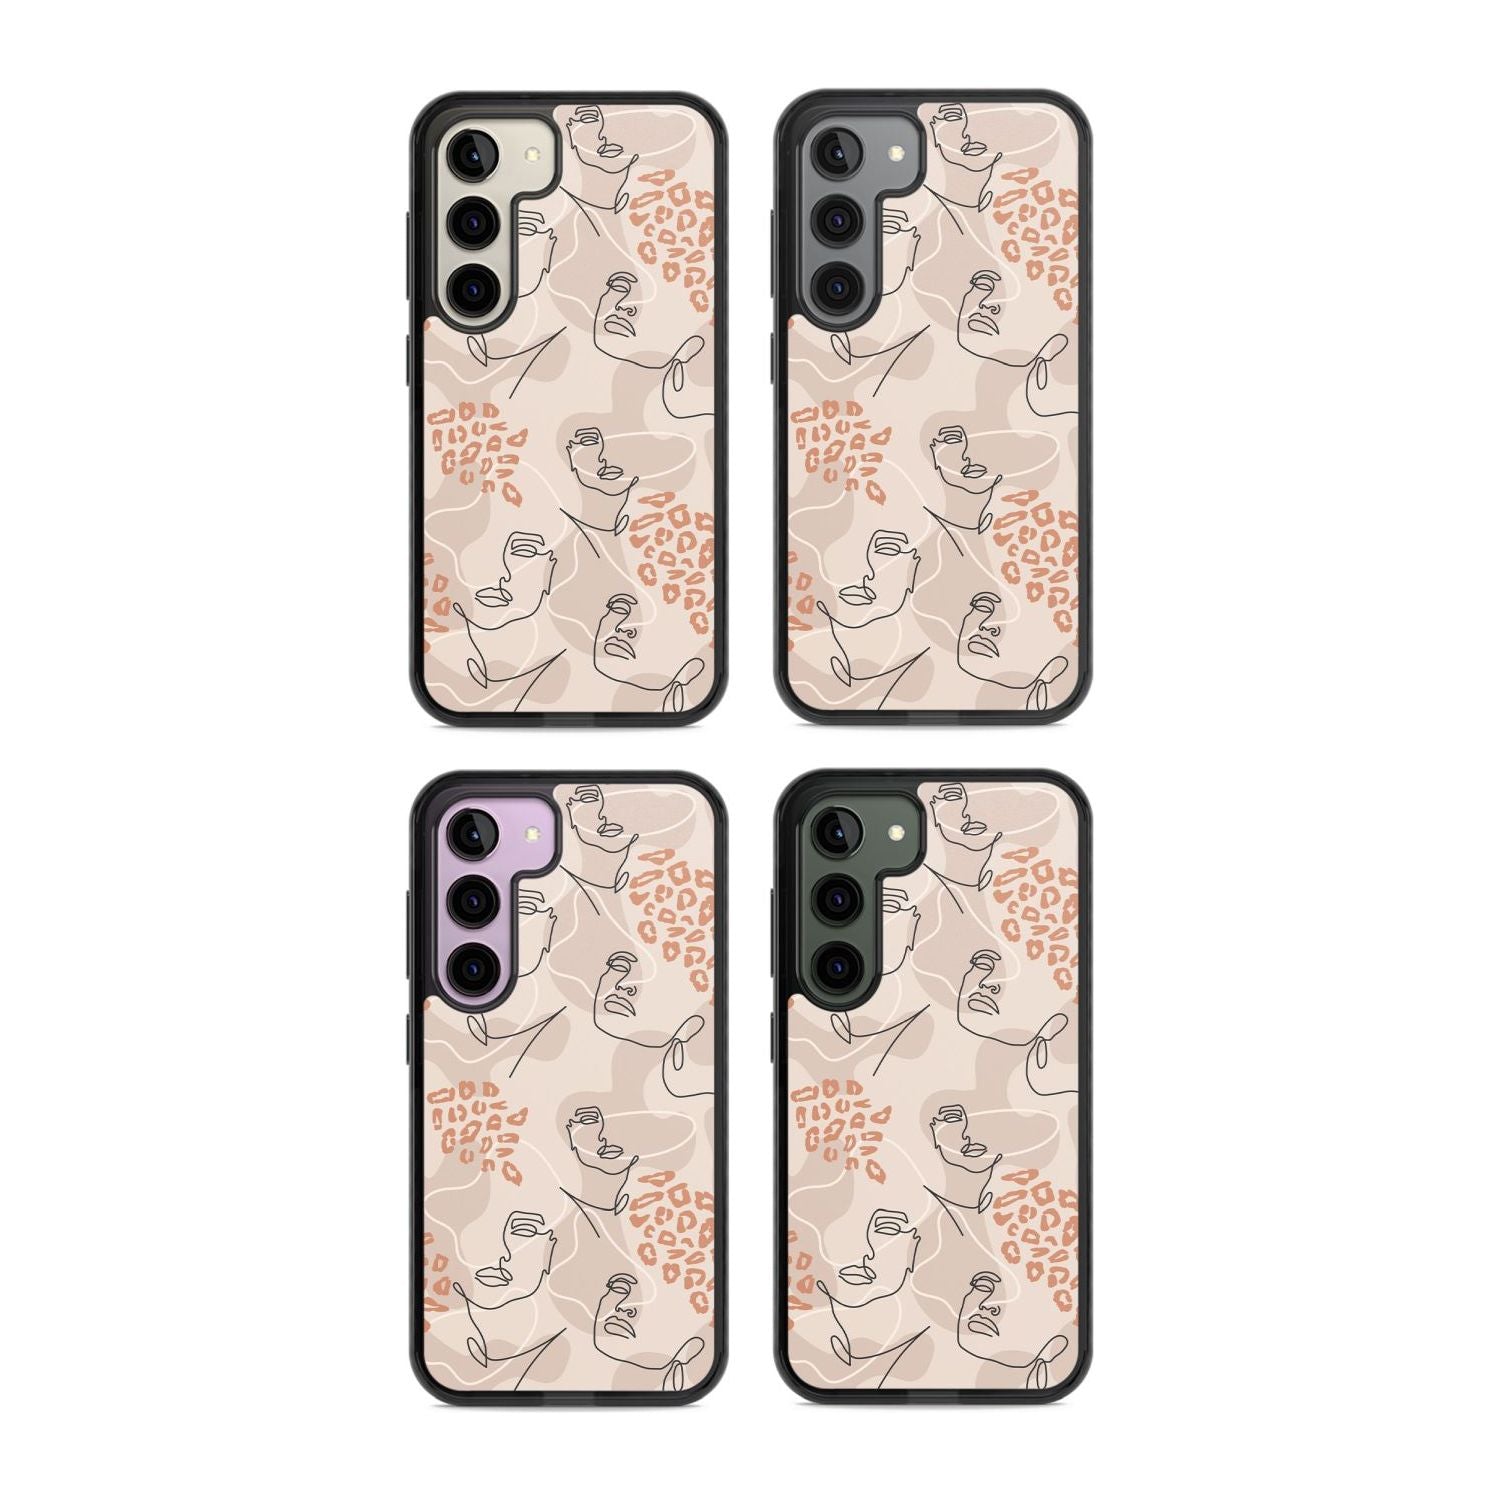 Leopard Print Stylish Abstract Faces Phone Case iPhone 15 Pro Max / Black Impact Case,iPhone 15 Plus / Black Impact Case,iPhone 15 Pro / Black Impact Case,iPhone 15 / Black Impact Case,iPhone 15 Pro Max / Impact Case,iPhone 15 Plus / Impact Case,iPhone 15 Pro / Impact Case,iPhone 15 / Impact Case,iPhone 15 Pro Max / Magsafe Black Impact Case,iPhone 15 Plus / Magsafe Black Impact Case,iPhone 15 Pro / Magsafe Black Impact Case,iPhone 15 / Magsafe Black Impact Case,iPhone 14 Pro Max / Black Impact Case,iPhone 